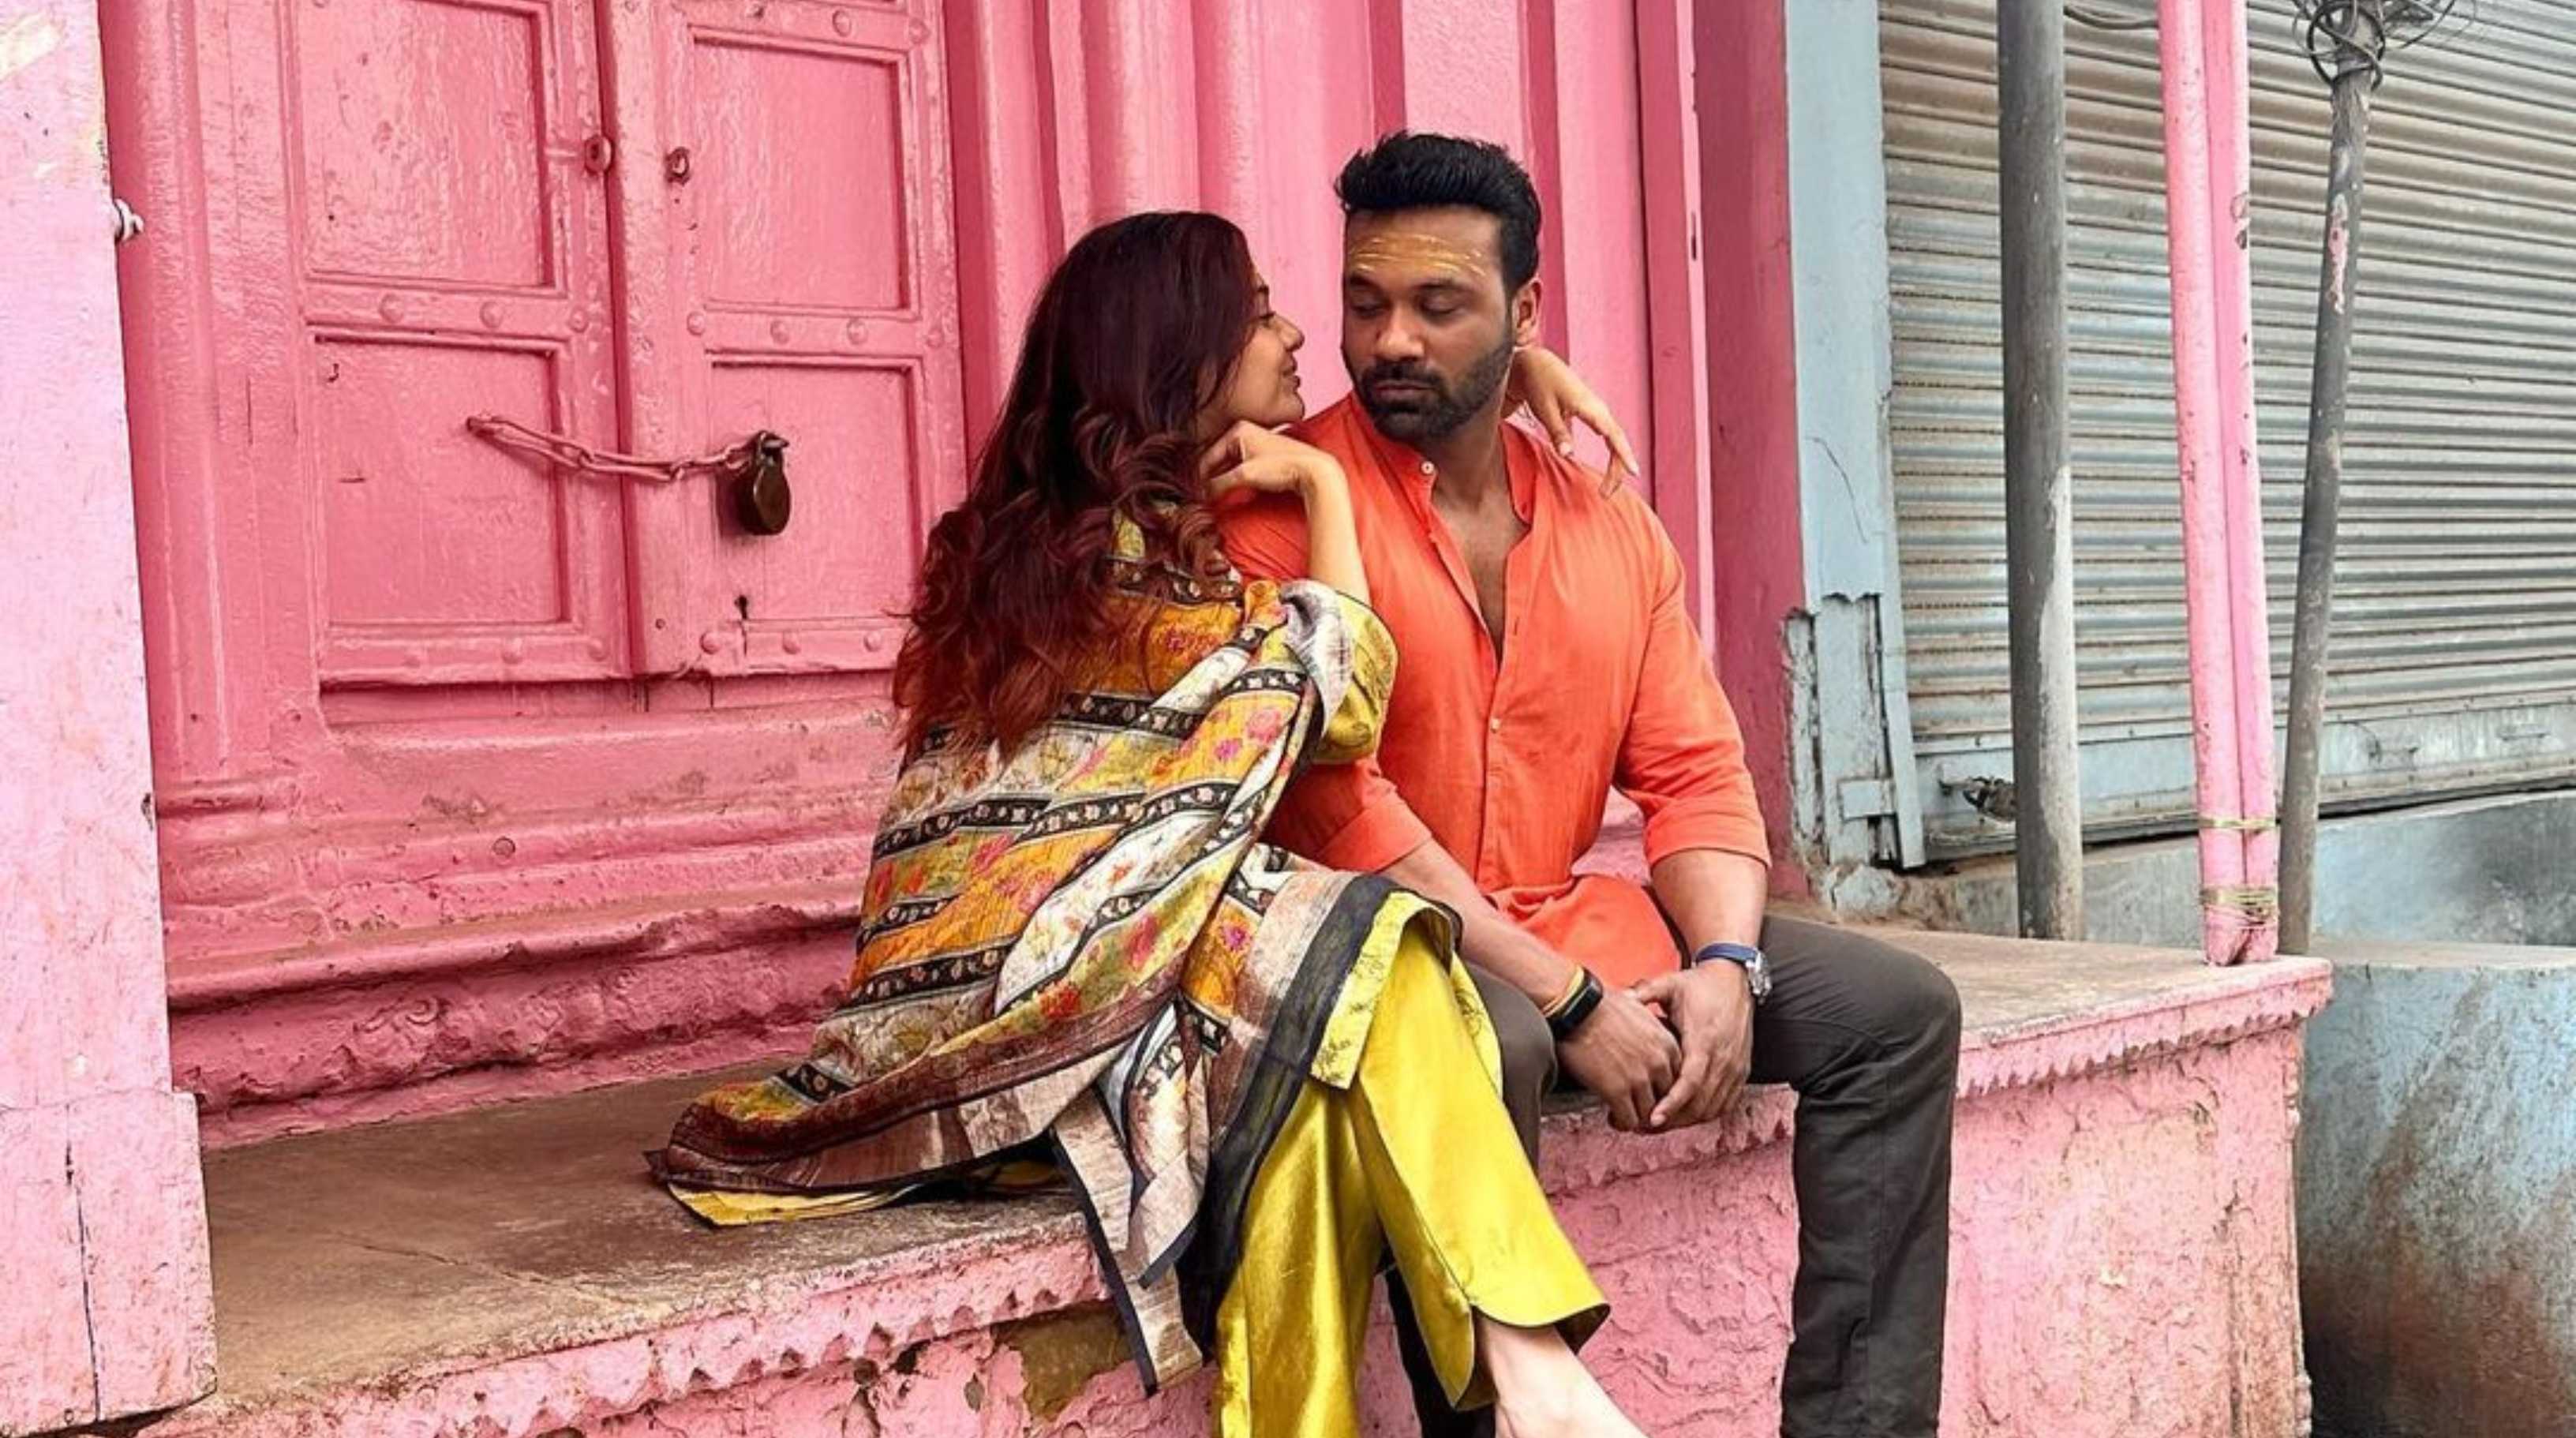 ‘You connected me to god’: Divya Agarwal travels to Banaras with fiancé Apurva; netizens have mixed reactions